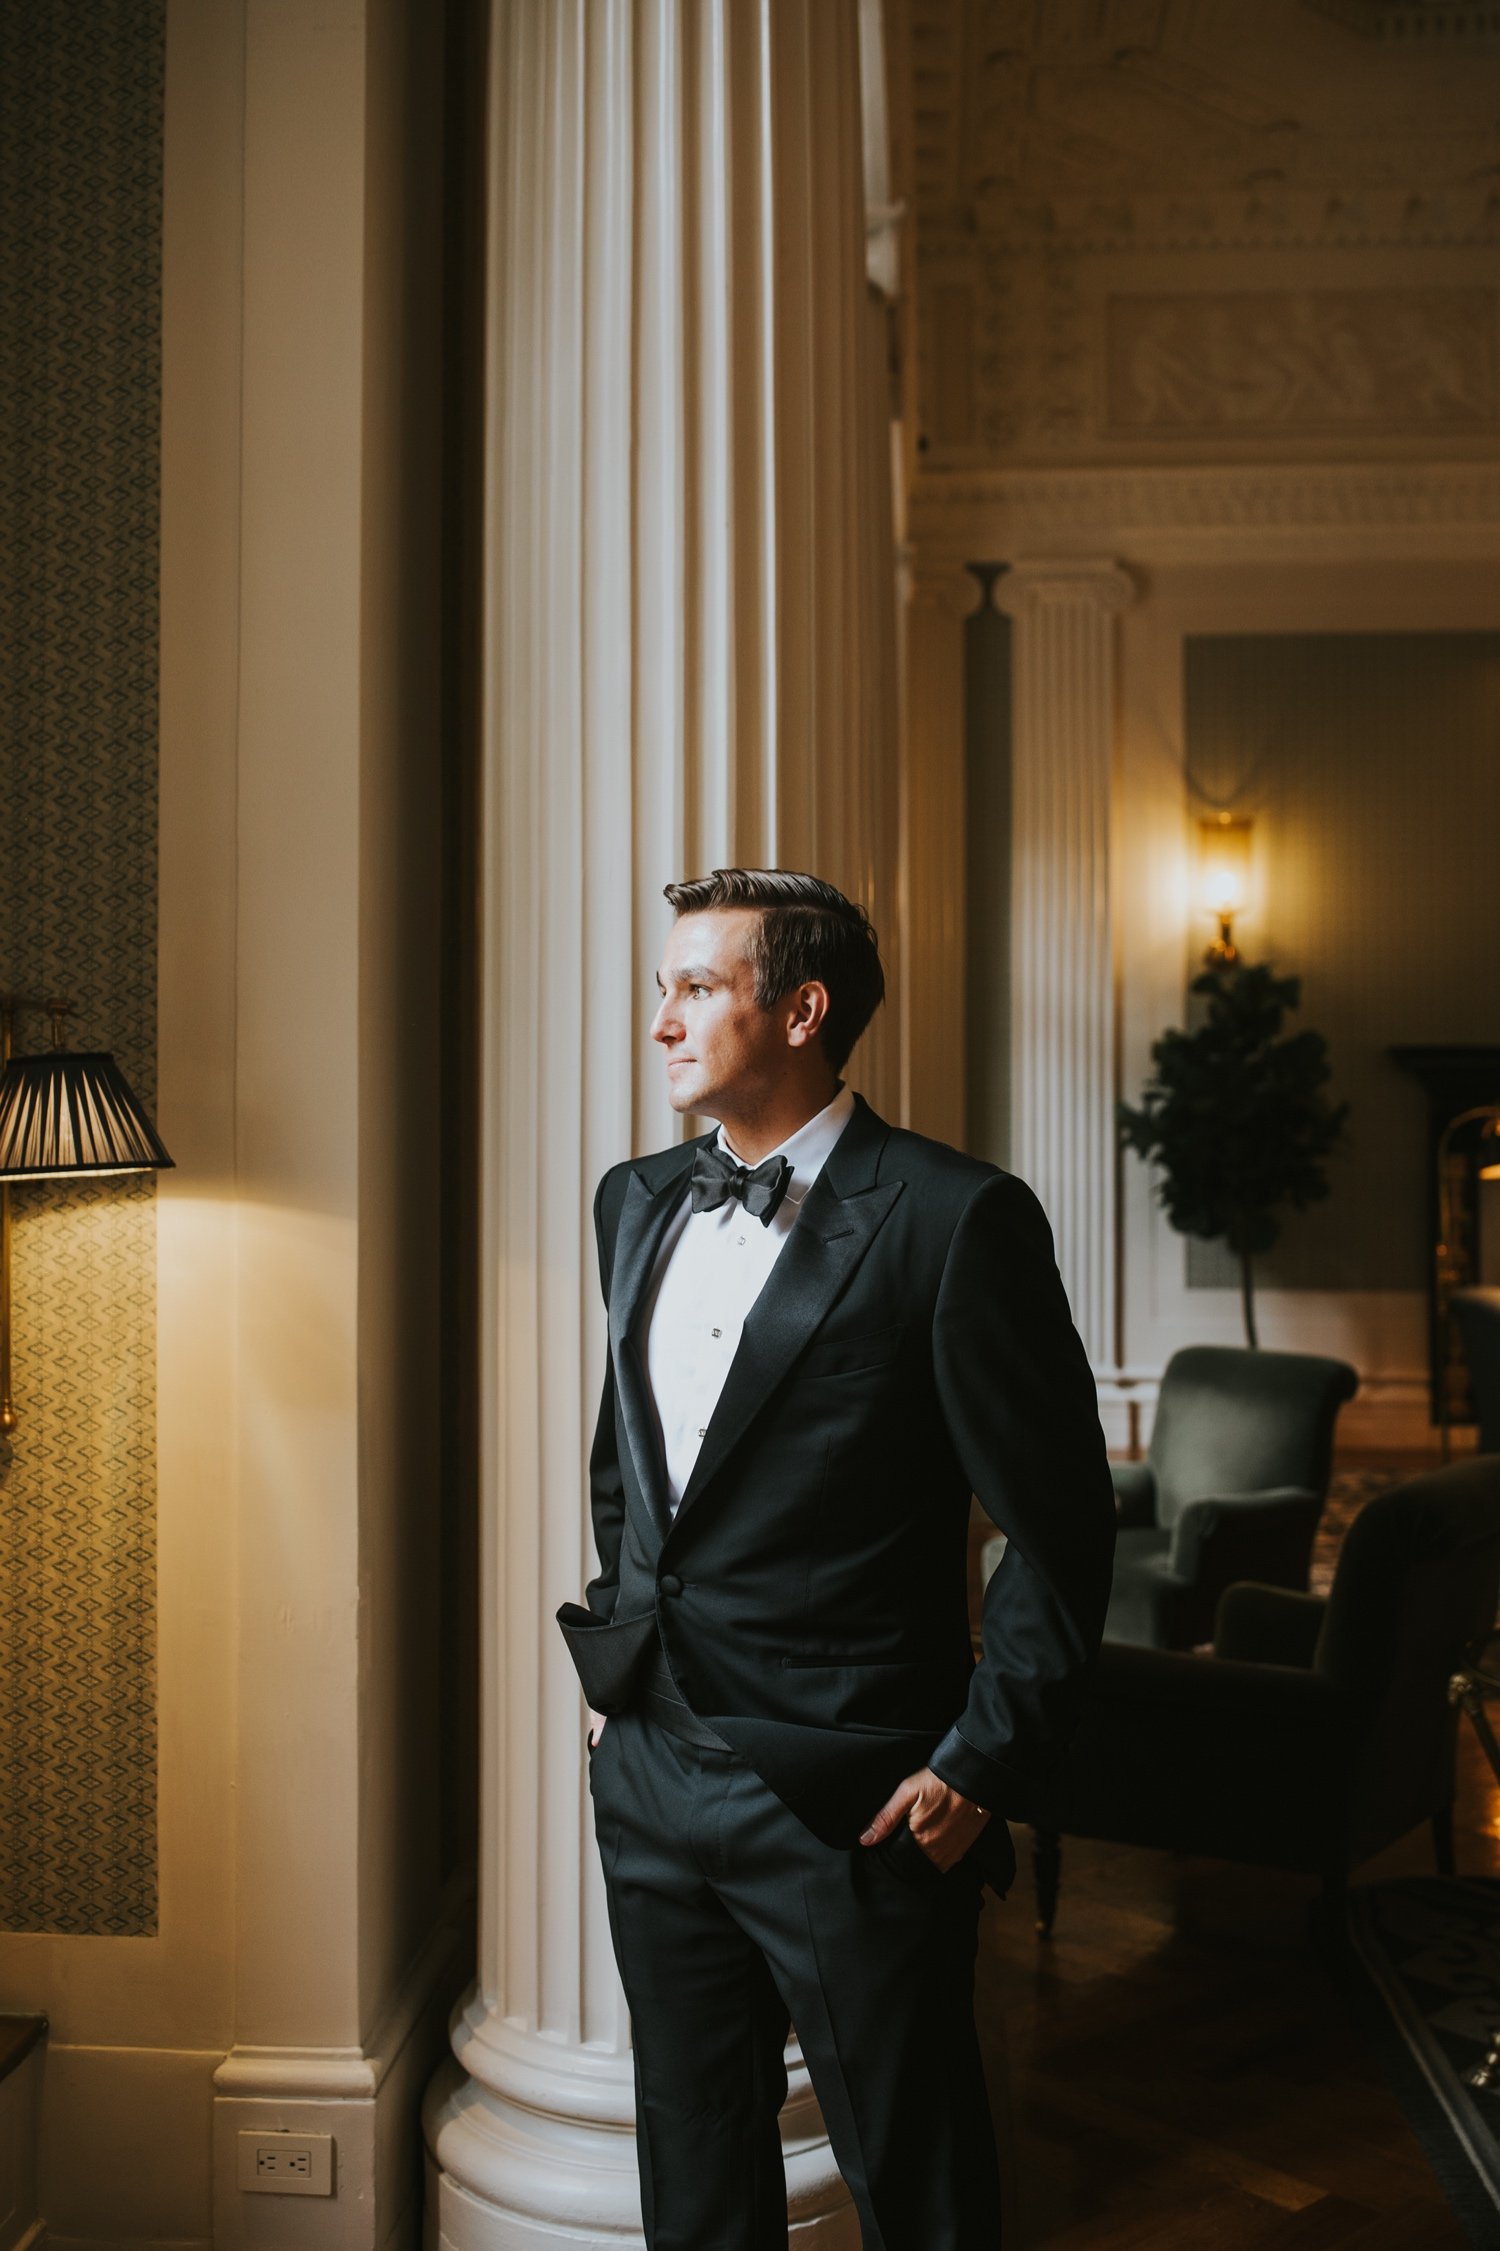 Hudson Valley Wedding Photographer, The Foundry LIC Wedding, The Foundry Wedding, Groom Getting Ready, The Yale Club